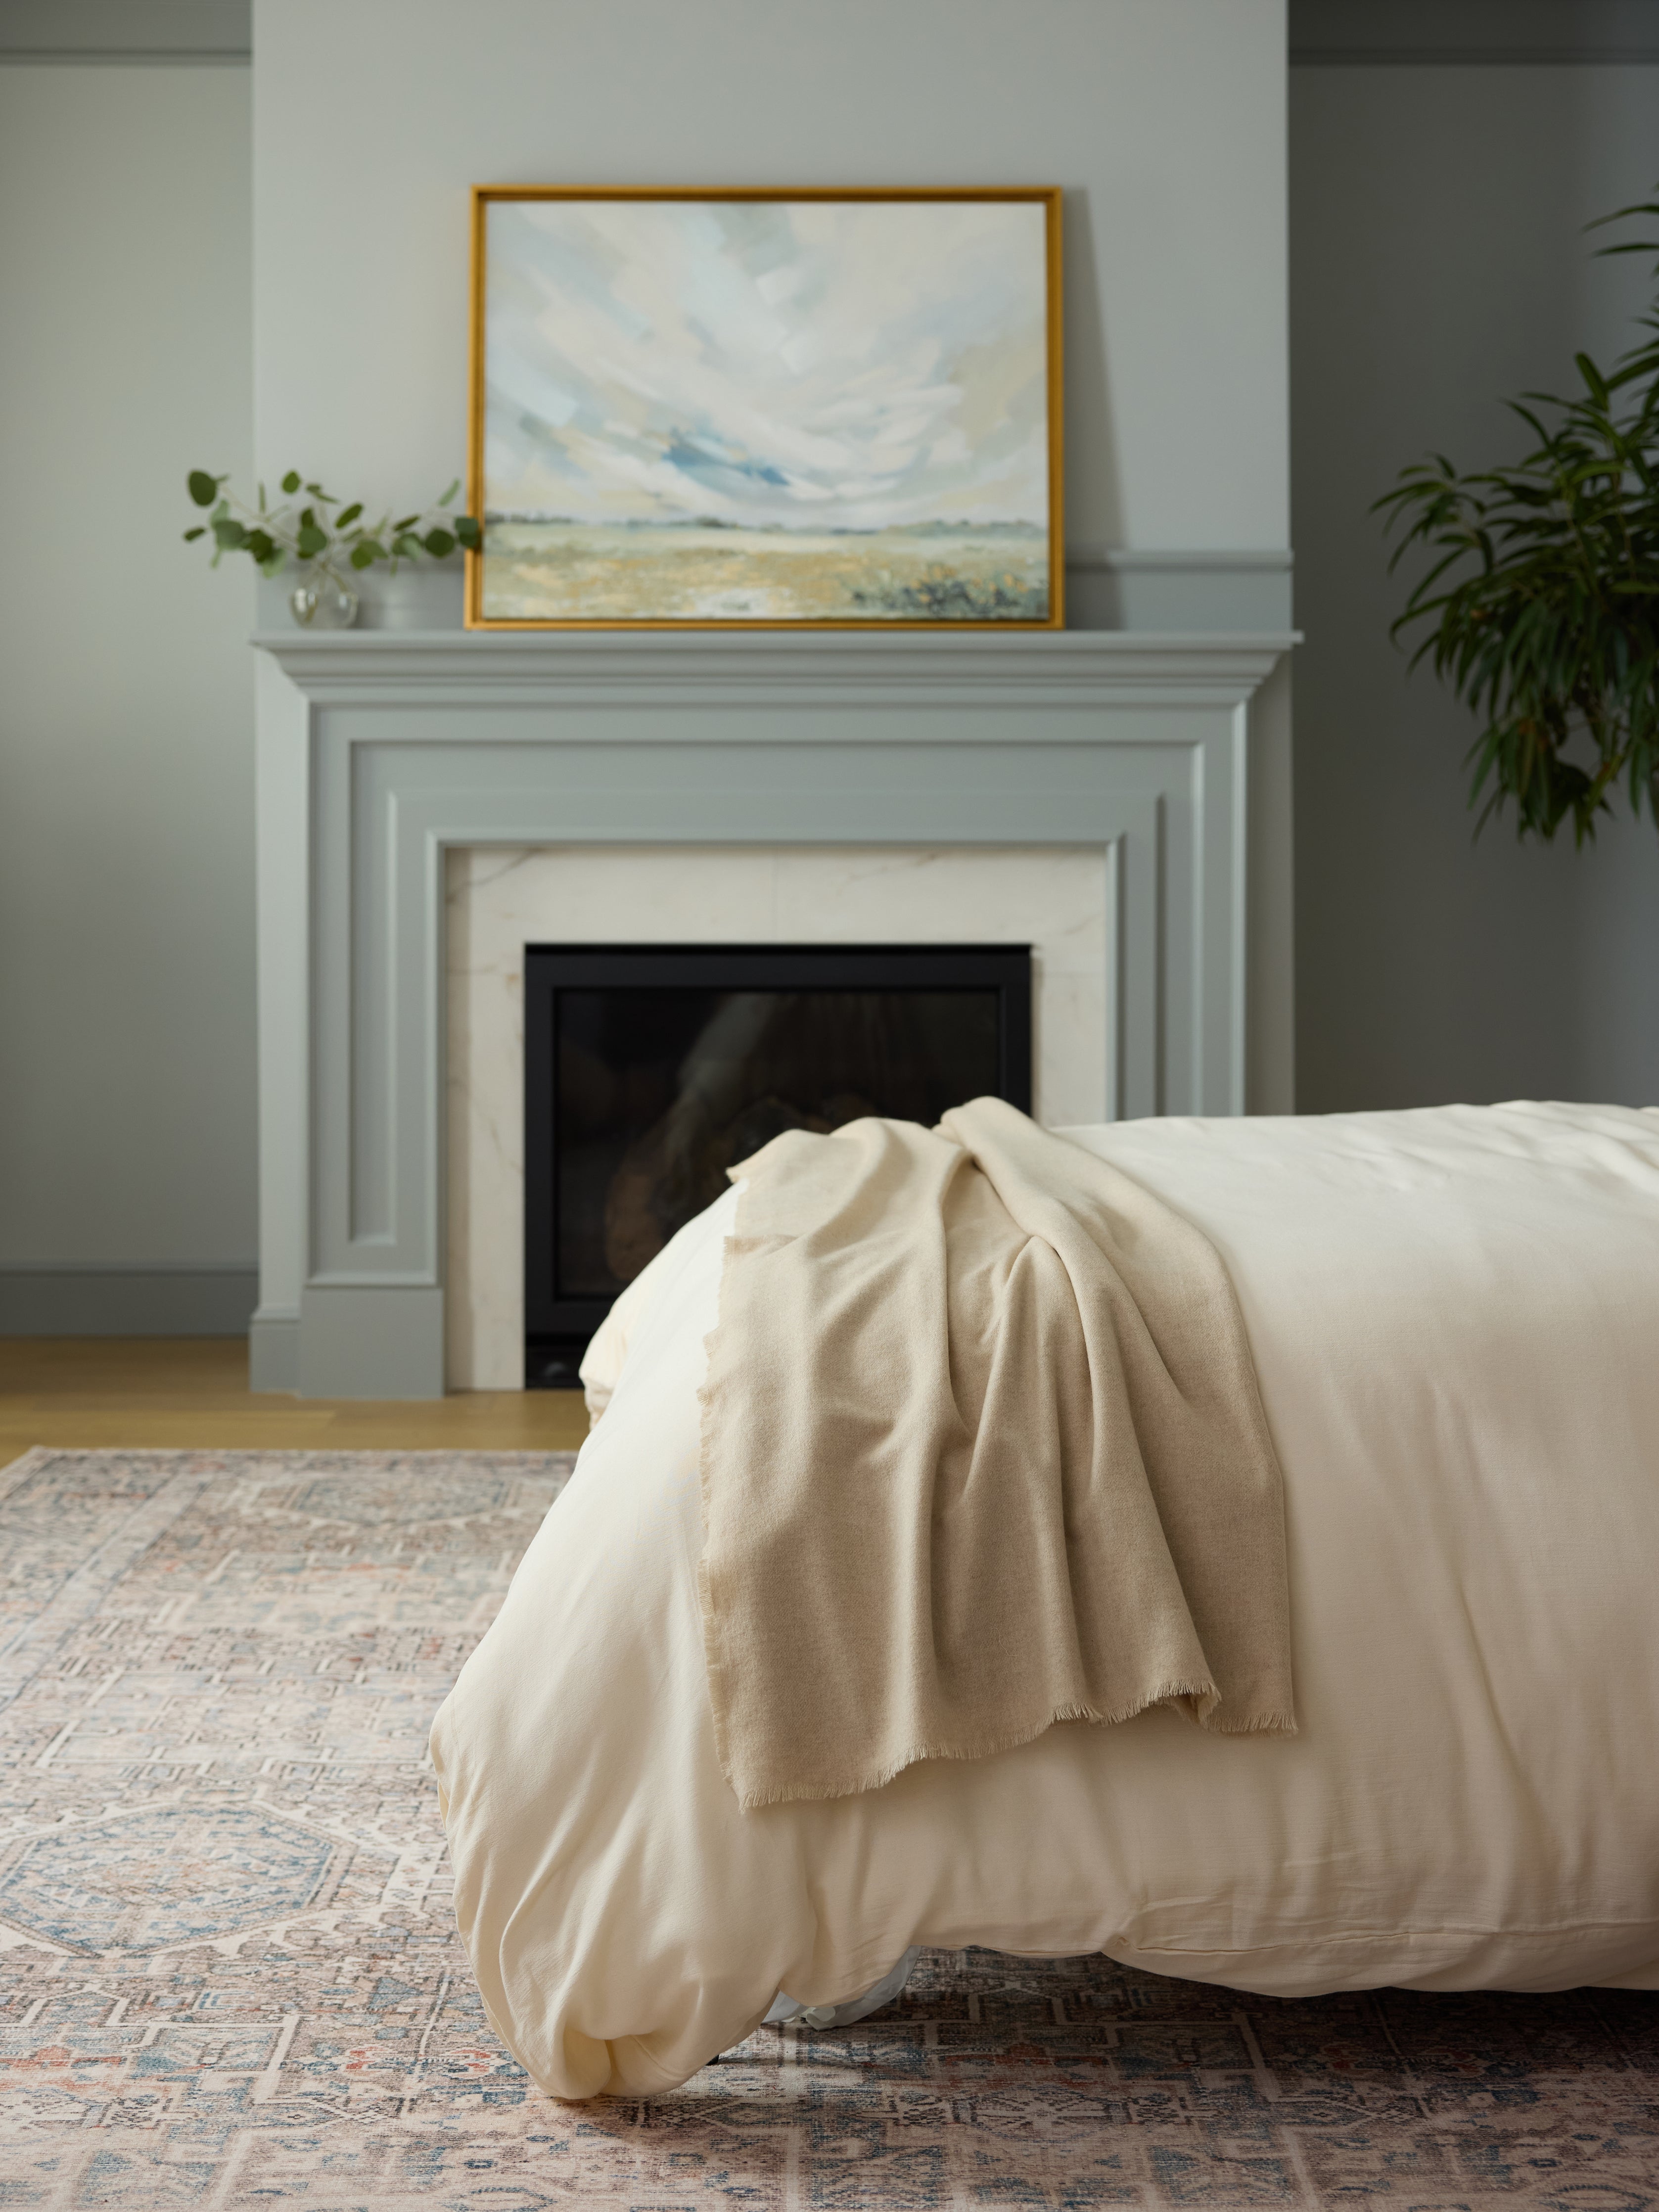 Buttermilk Aire Bamboo Duvet Cover. The Duvet Cover has been photographed on a bed in a home bedroom.|Color:Buttermilk